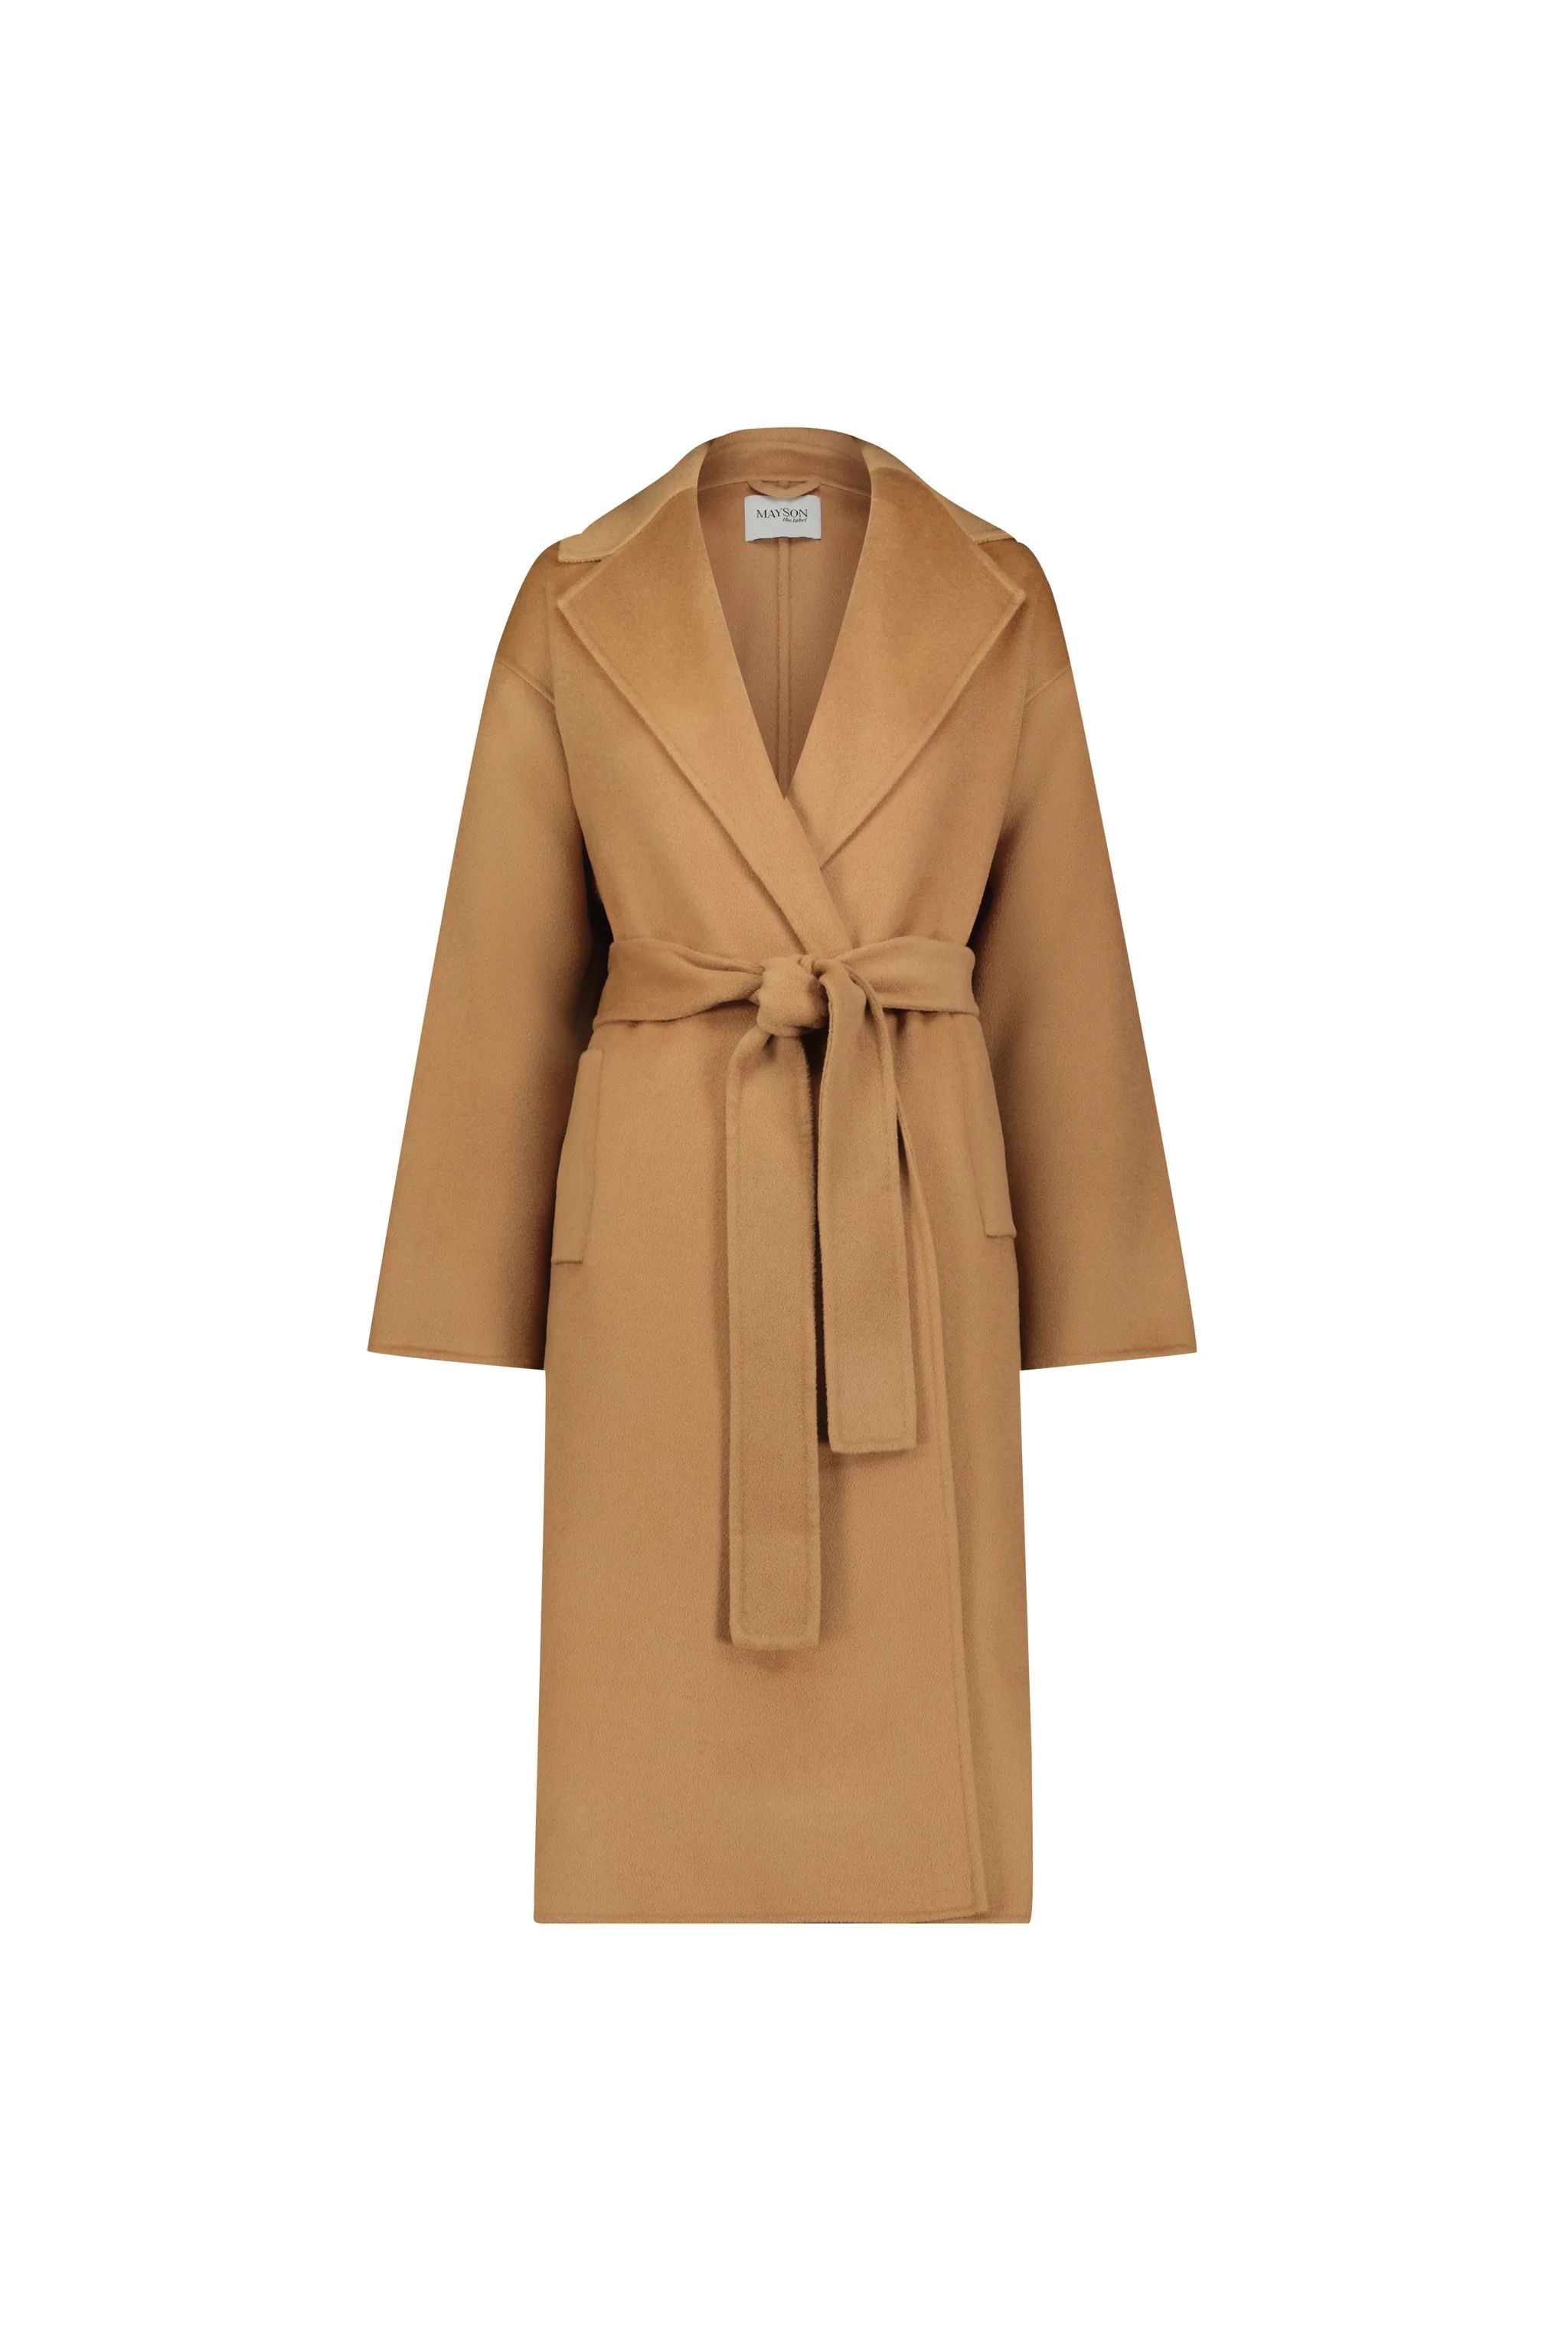 Wool Cashmere Double-Faced Wrap Coat | MAYSON the label